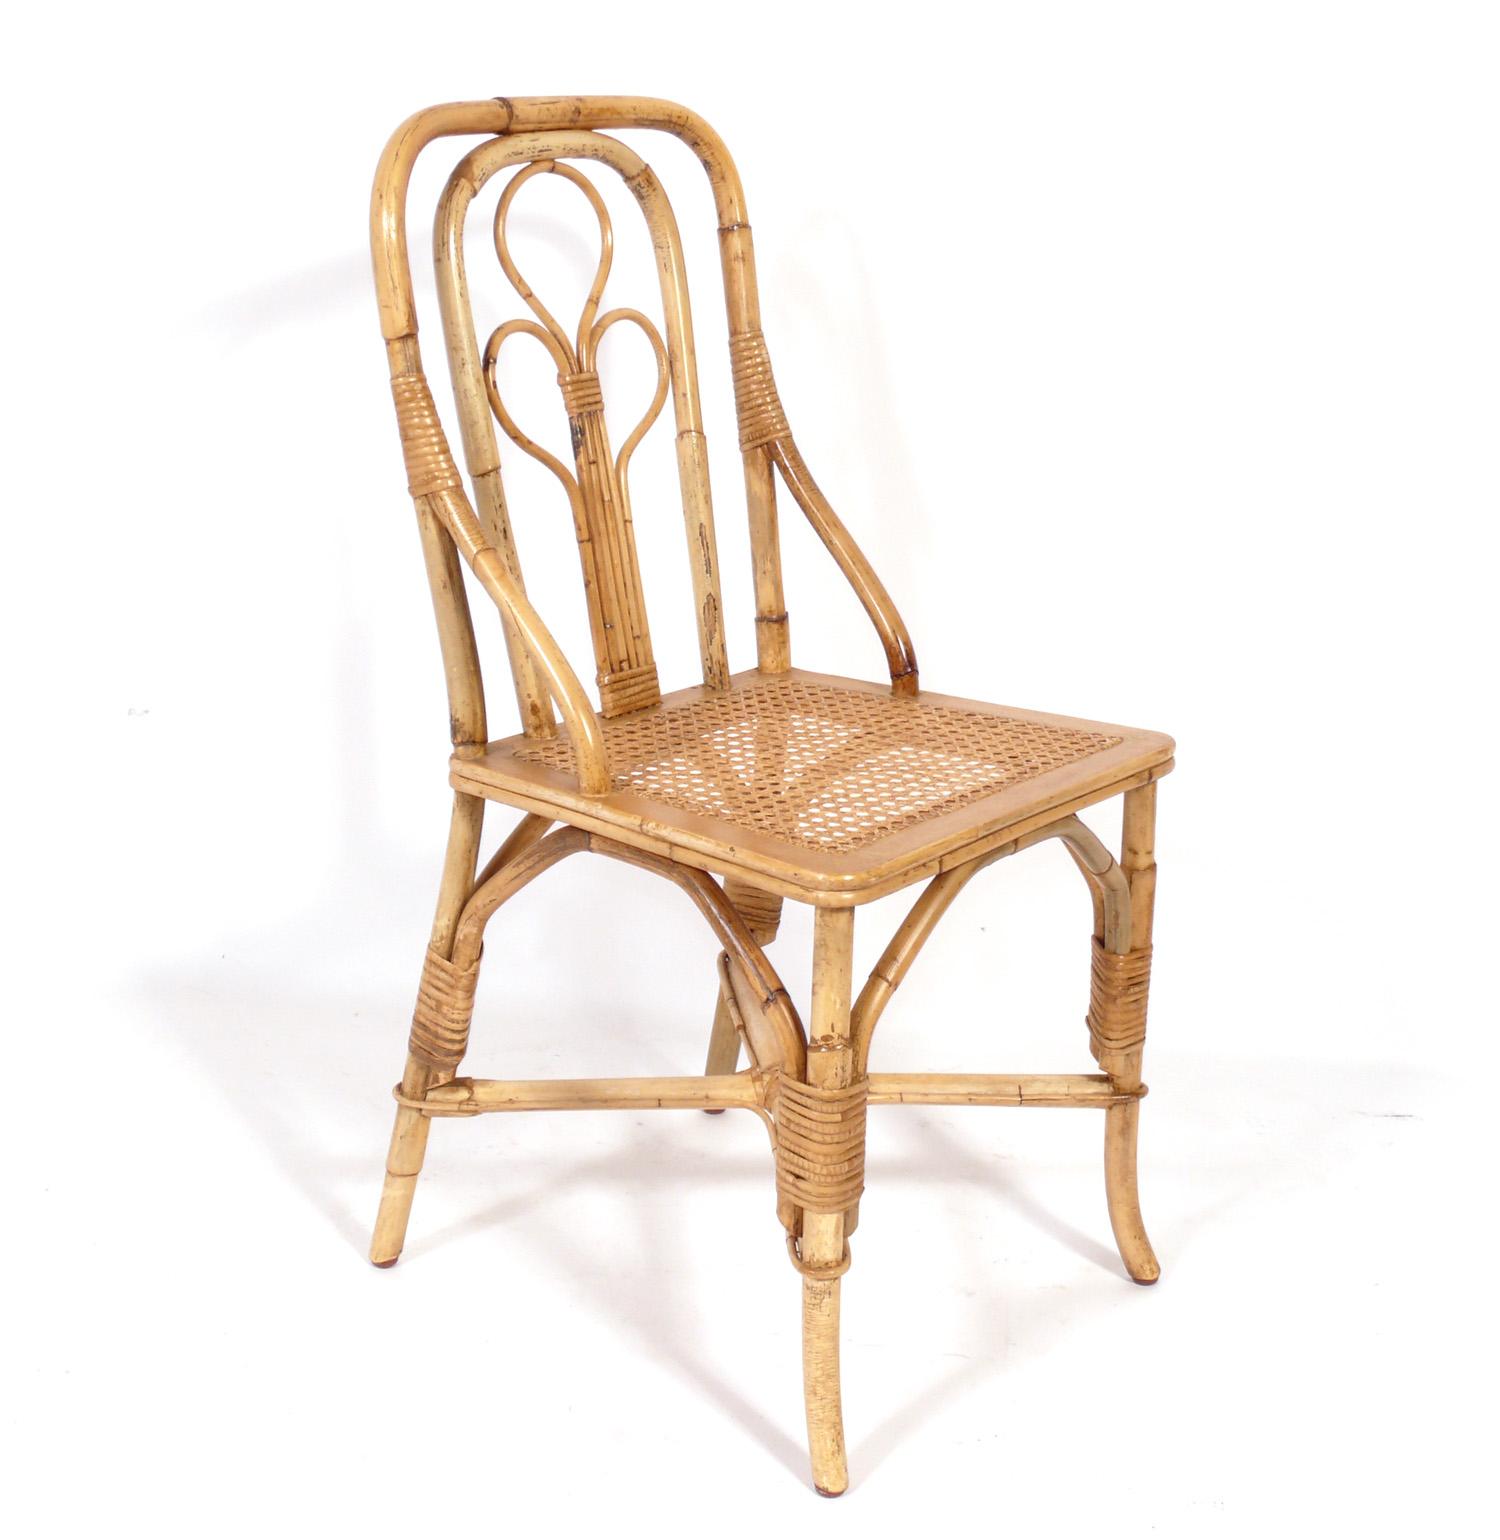 Set of six rattan or bamboo dining chairs, American, circa 1960s. They retain their warm original patina. 

This came from an estate with the matching dining table seen in the last photo. This listing is for the dining chairs only.